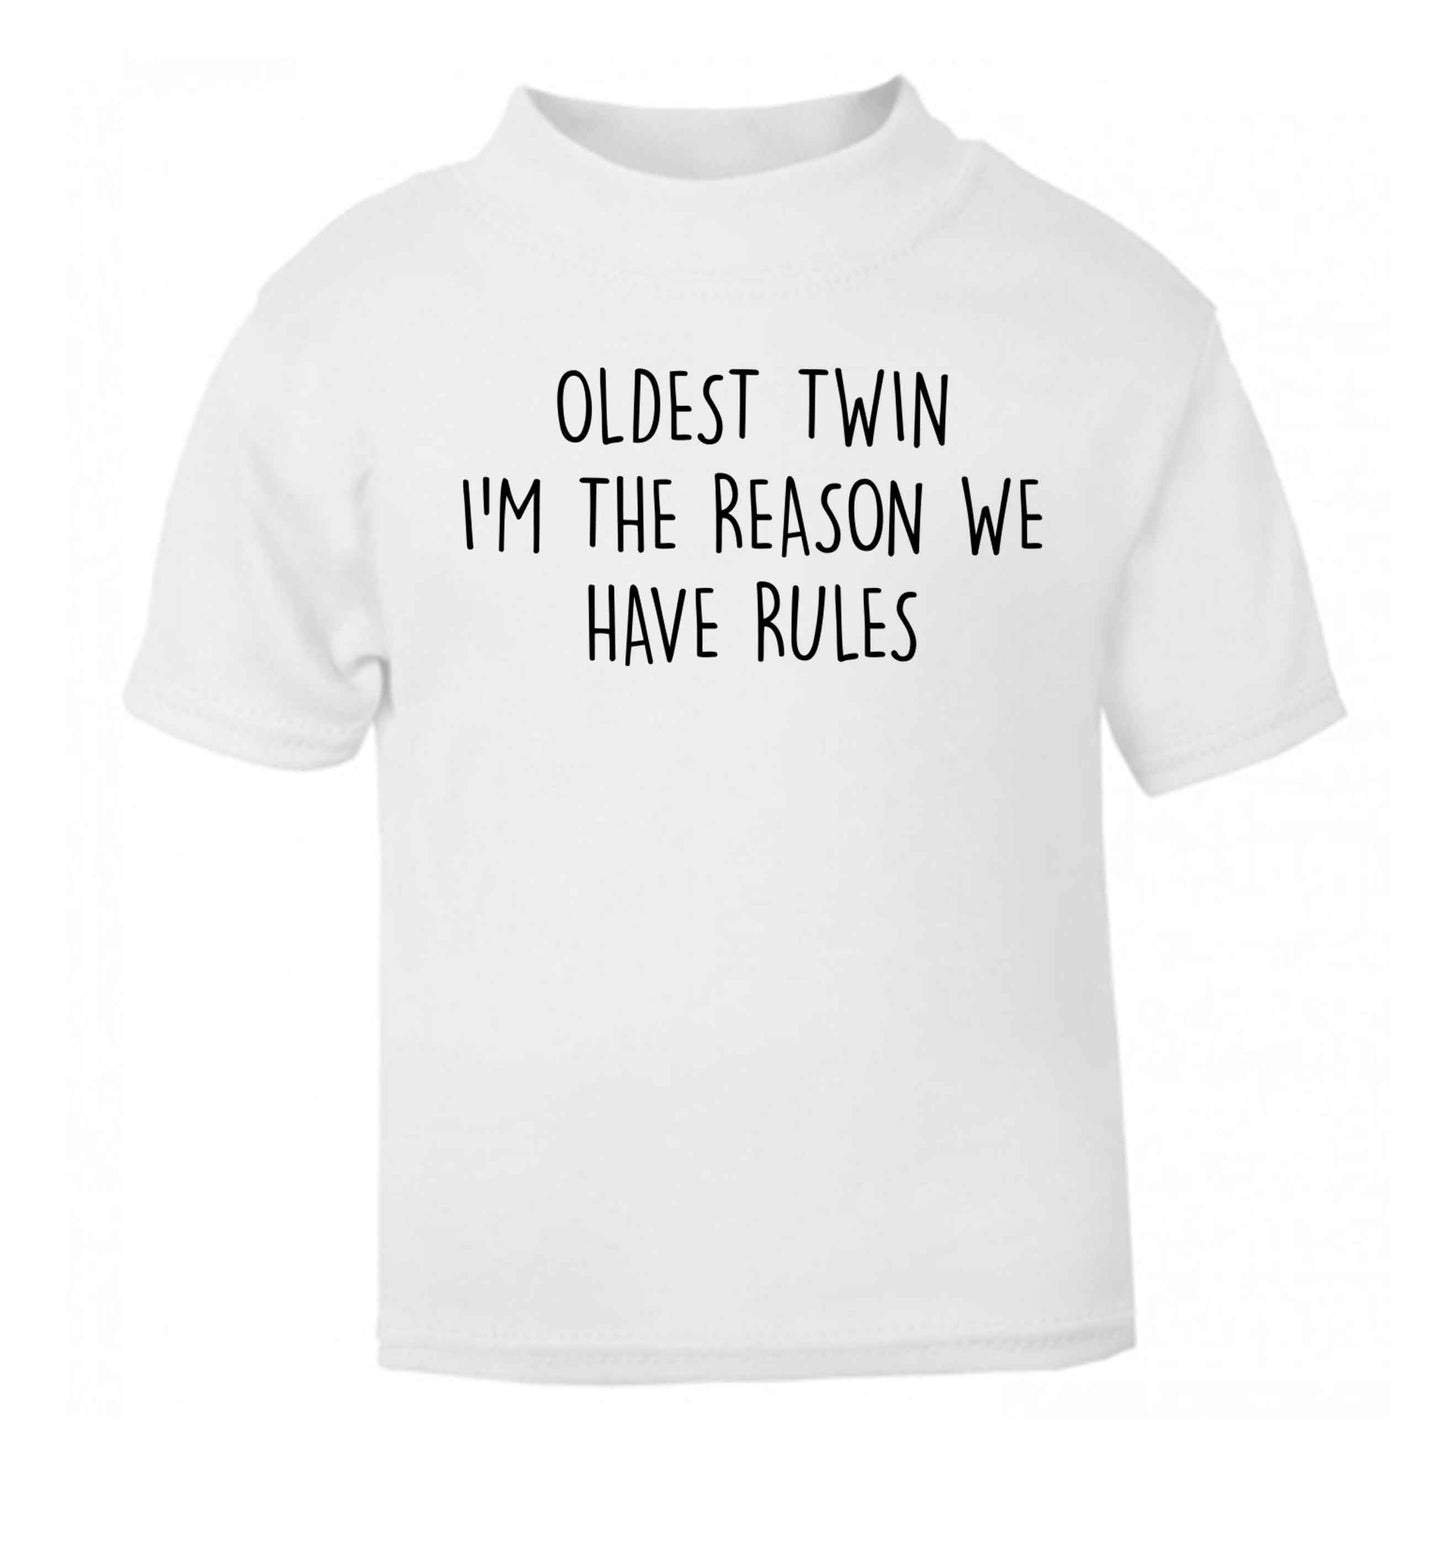 Oldest twin I'm the reason we have rules white baby toddler Tshirt 2 Years